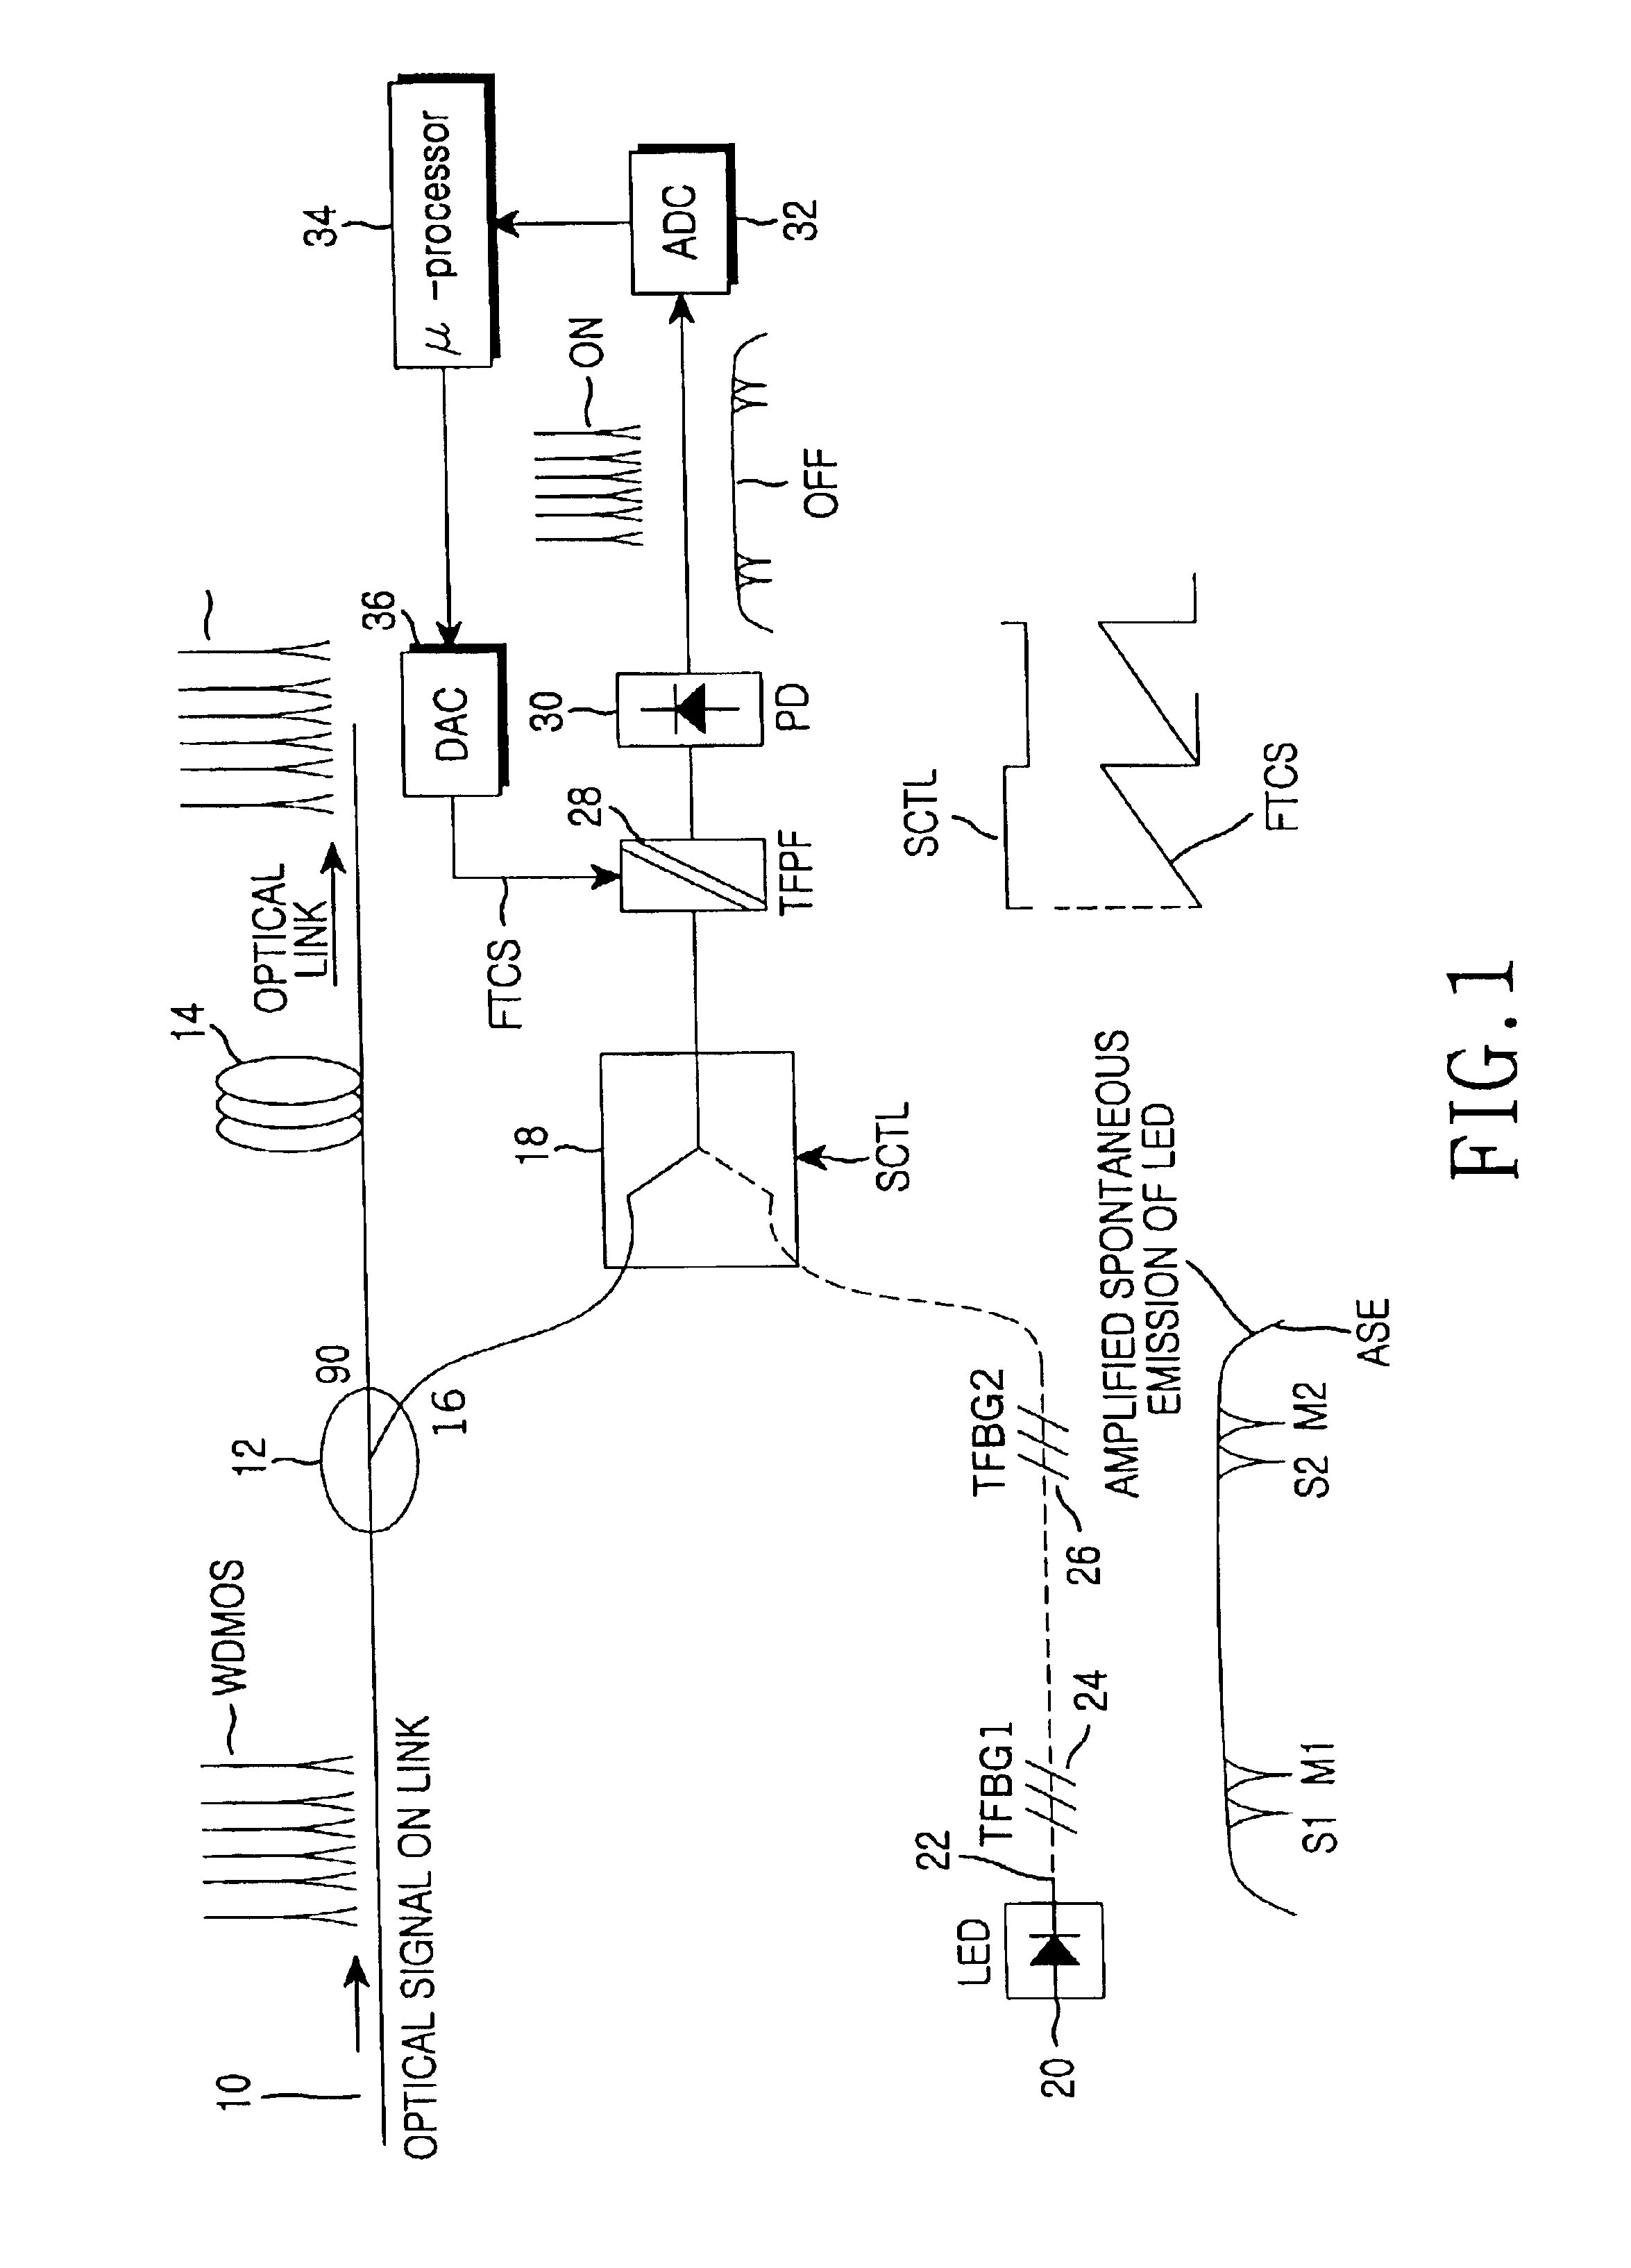 Method and apparatus for monitoring optical signal performance in wavelength division multiplexing system